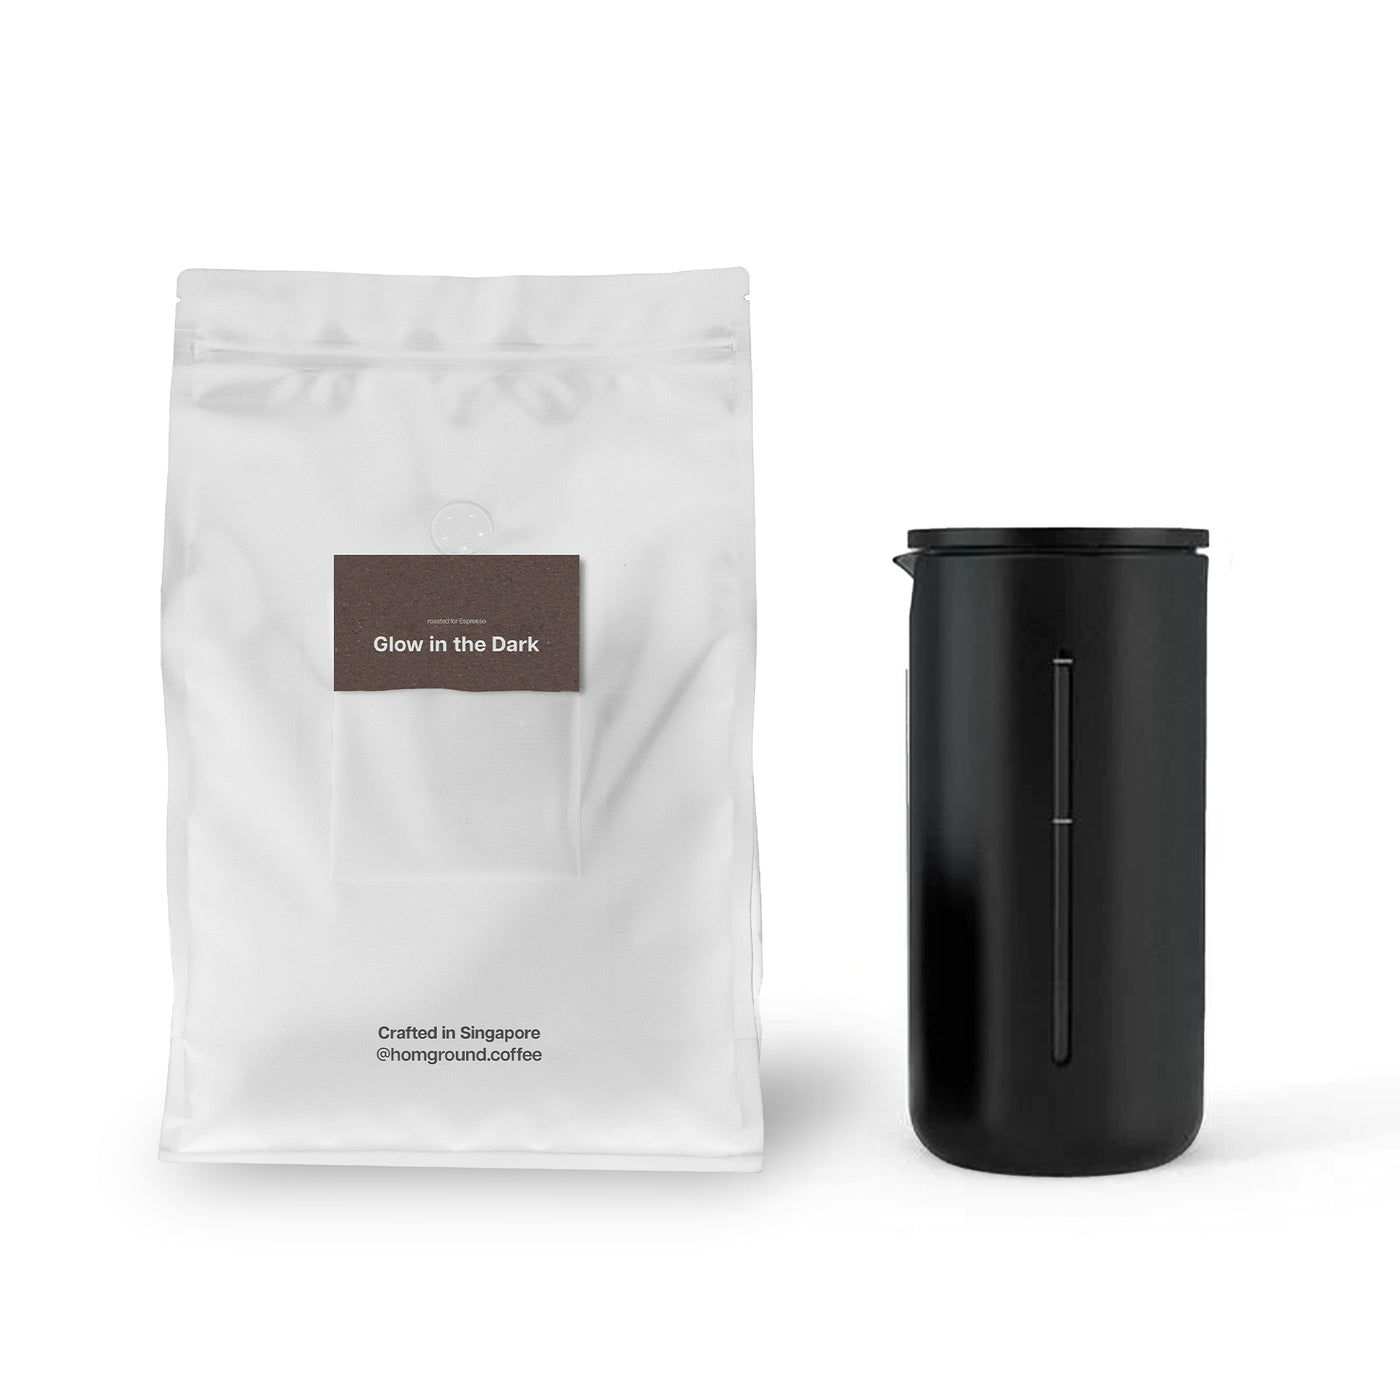 3 Months Prepaid Glow In The Dark Subscription (Get 1 Timemore French Press Free)